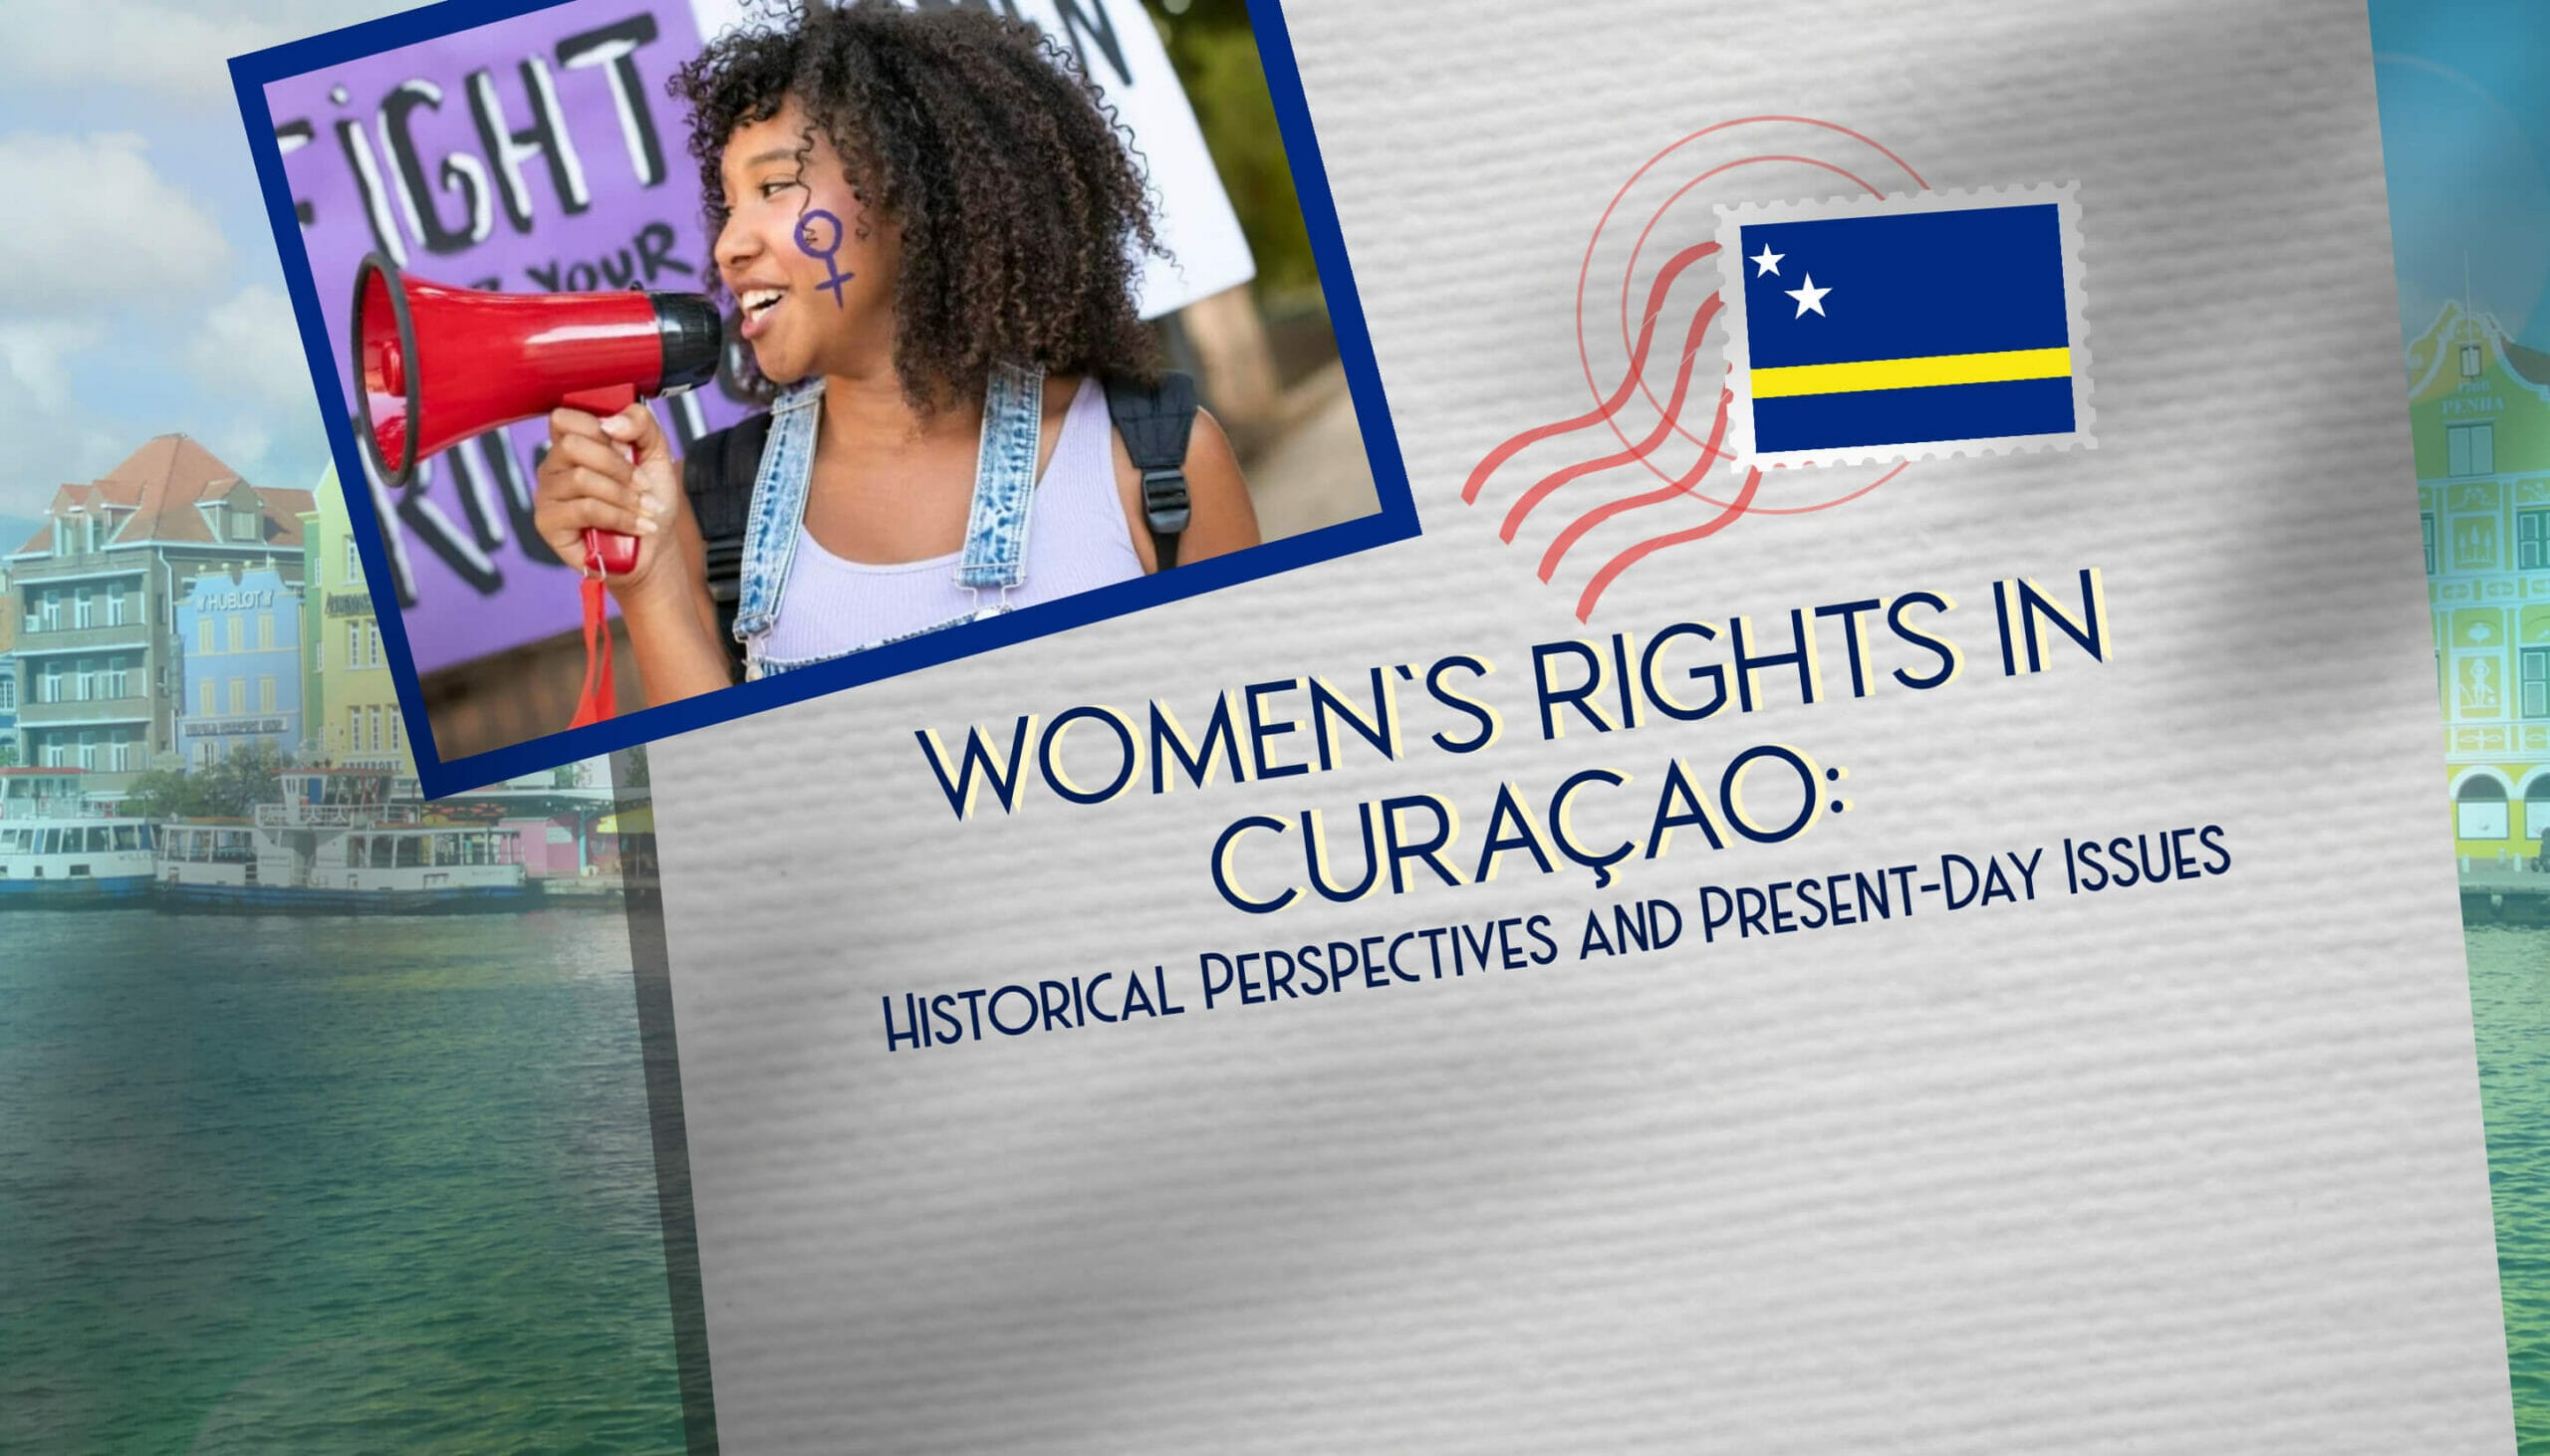 Women's Rights in Curaçao Historical Perspectives and Present-Day Issues